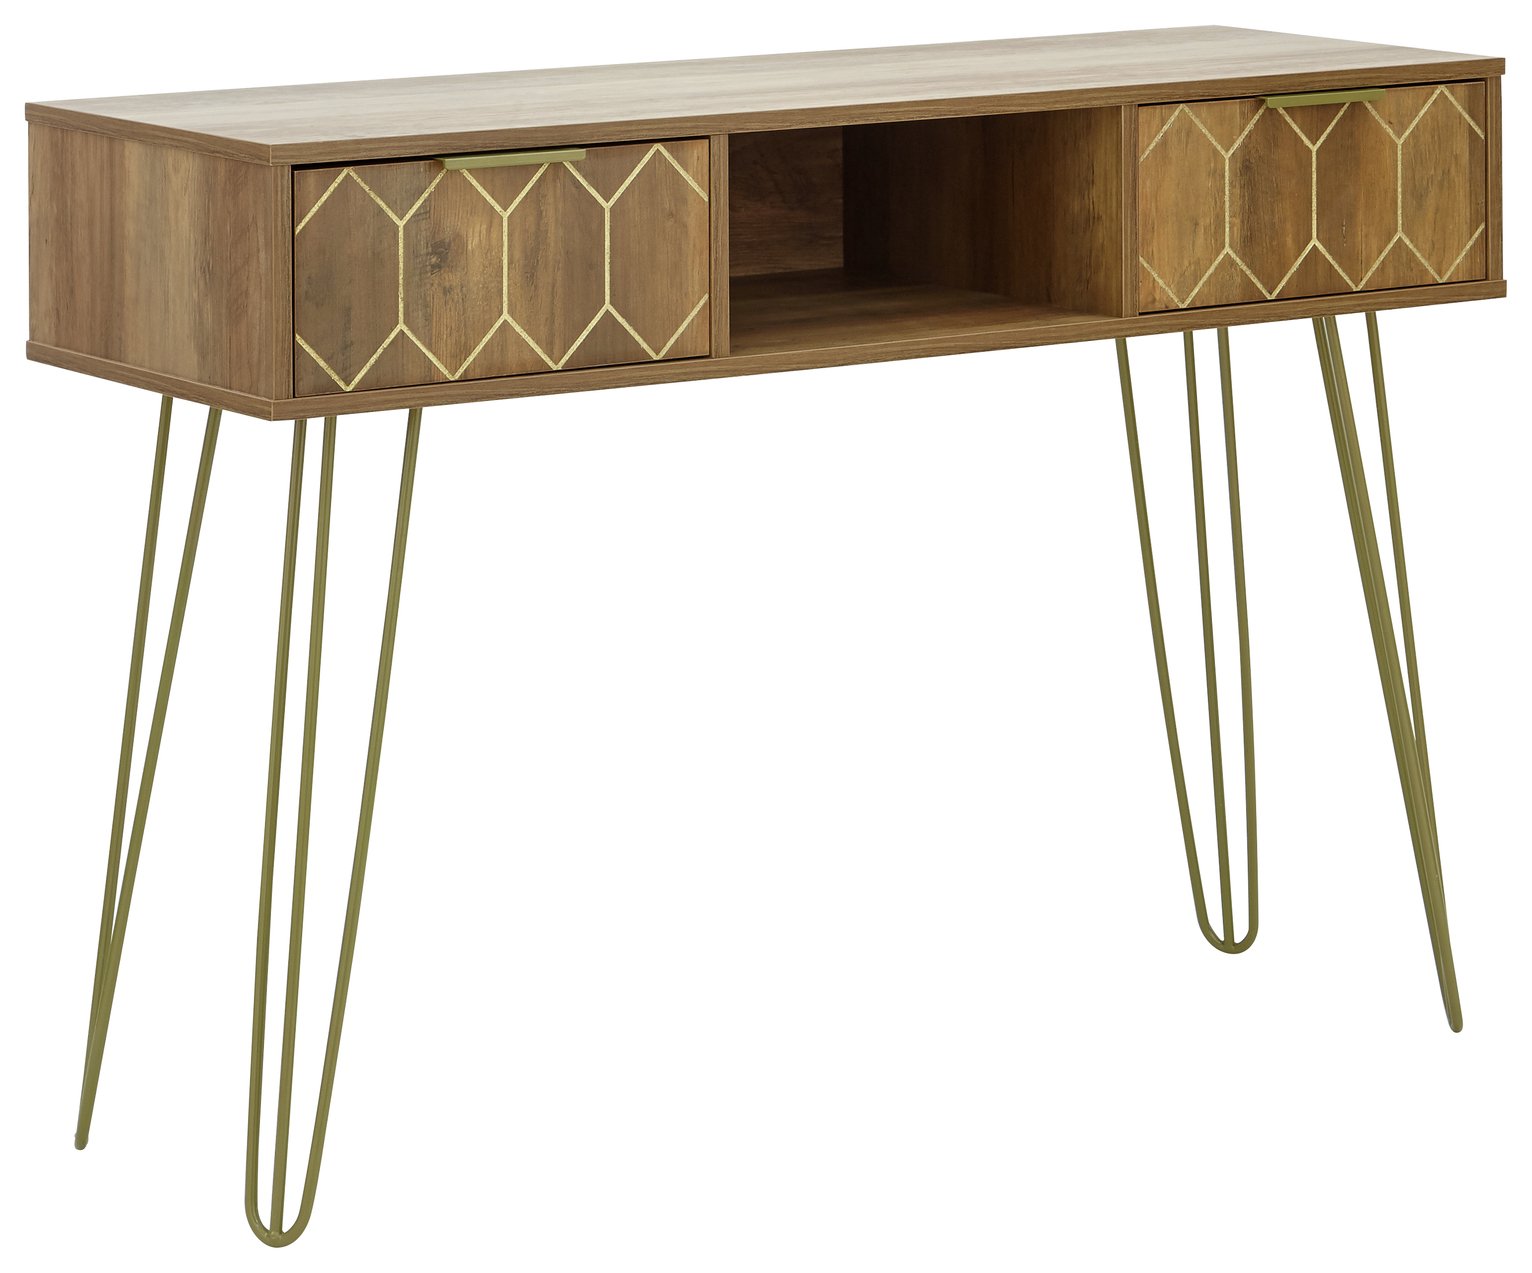 GFW Orleans 2 Drawer Console Table - Mango Wood Effect